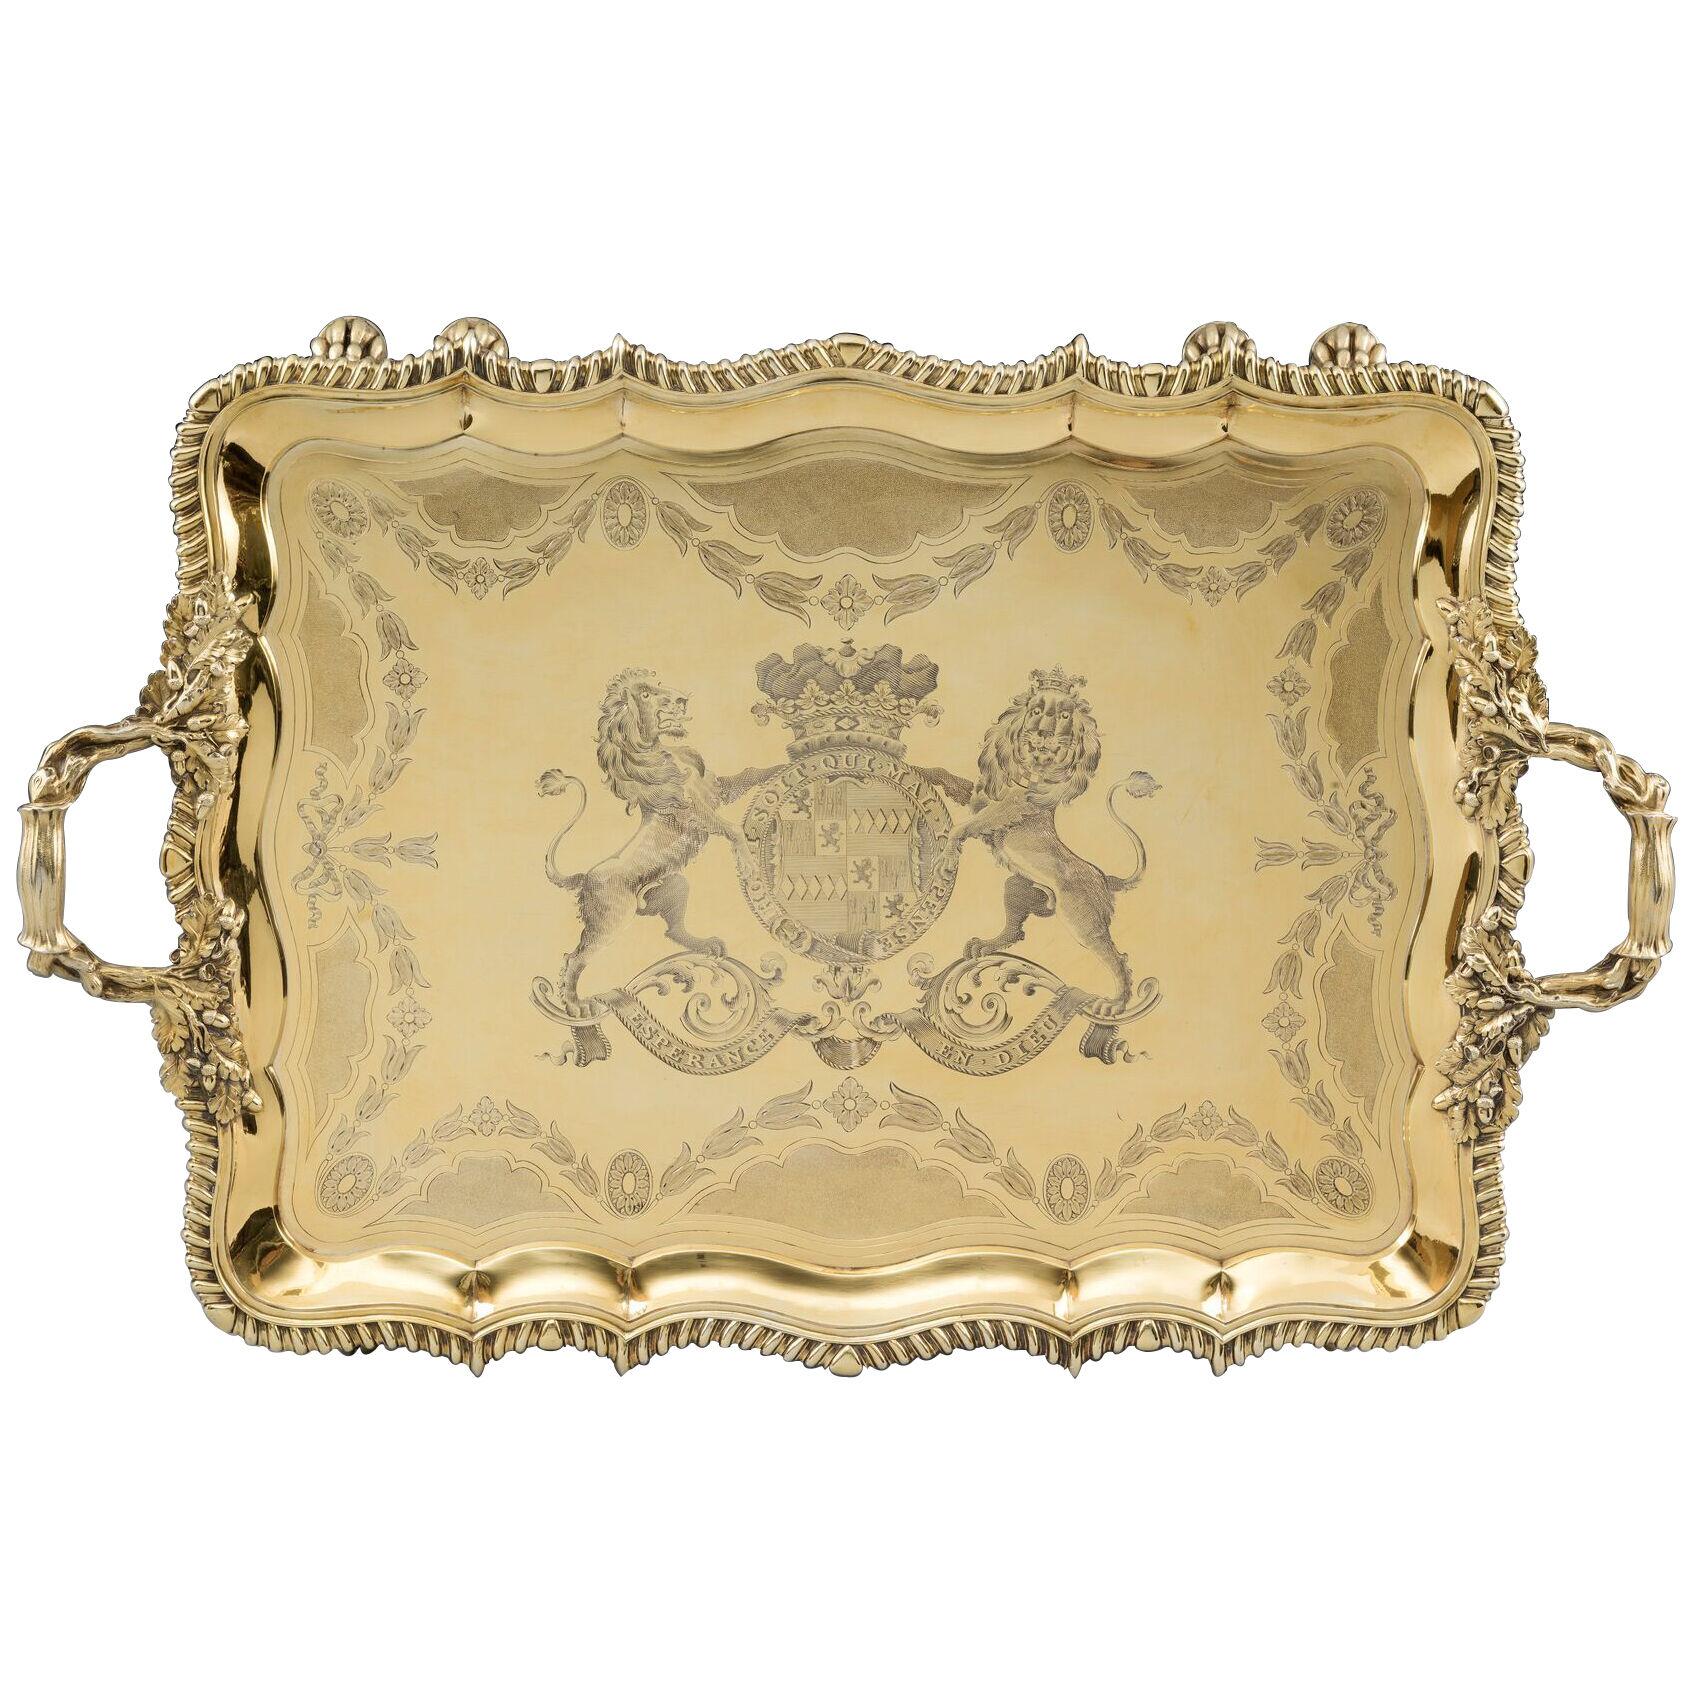 A Historically Important Silver-Gilt Tray